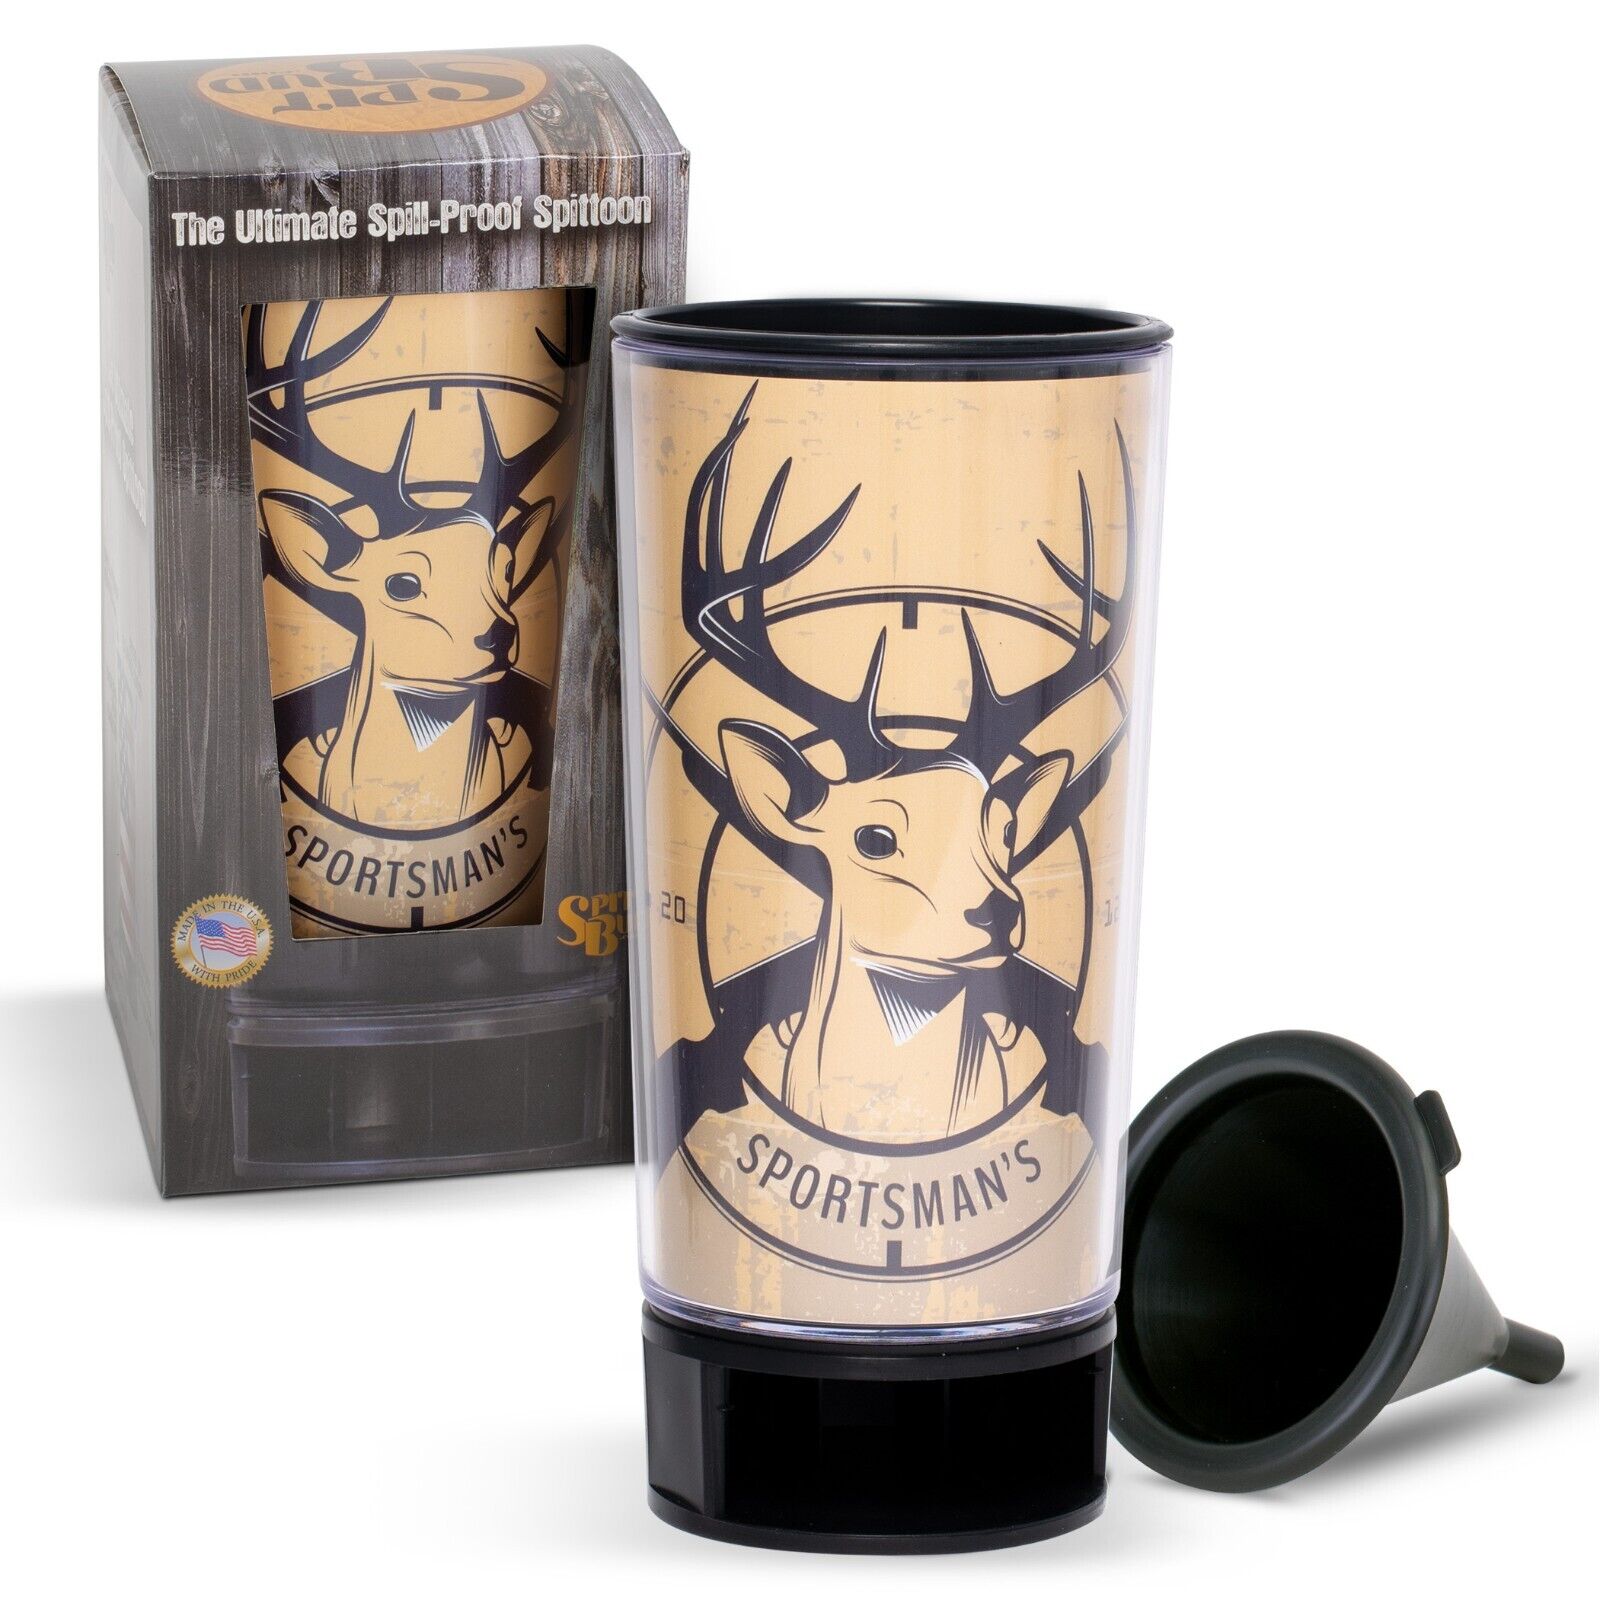 Spit Bud The Ultimate Spill Proof Portable Spittoon - Sportsman 